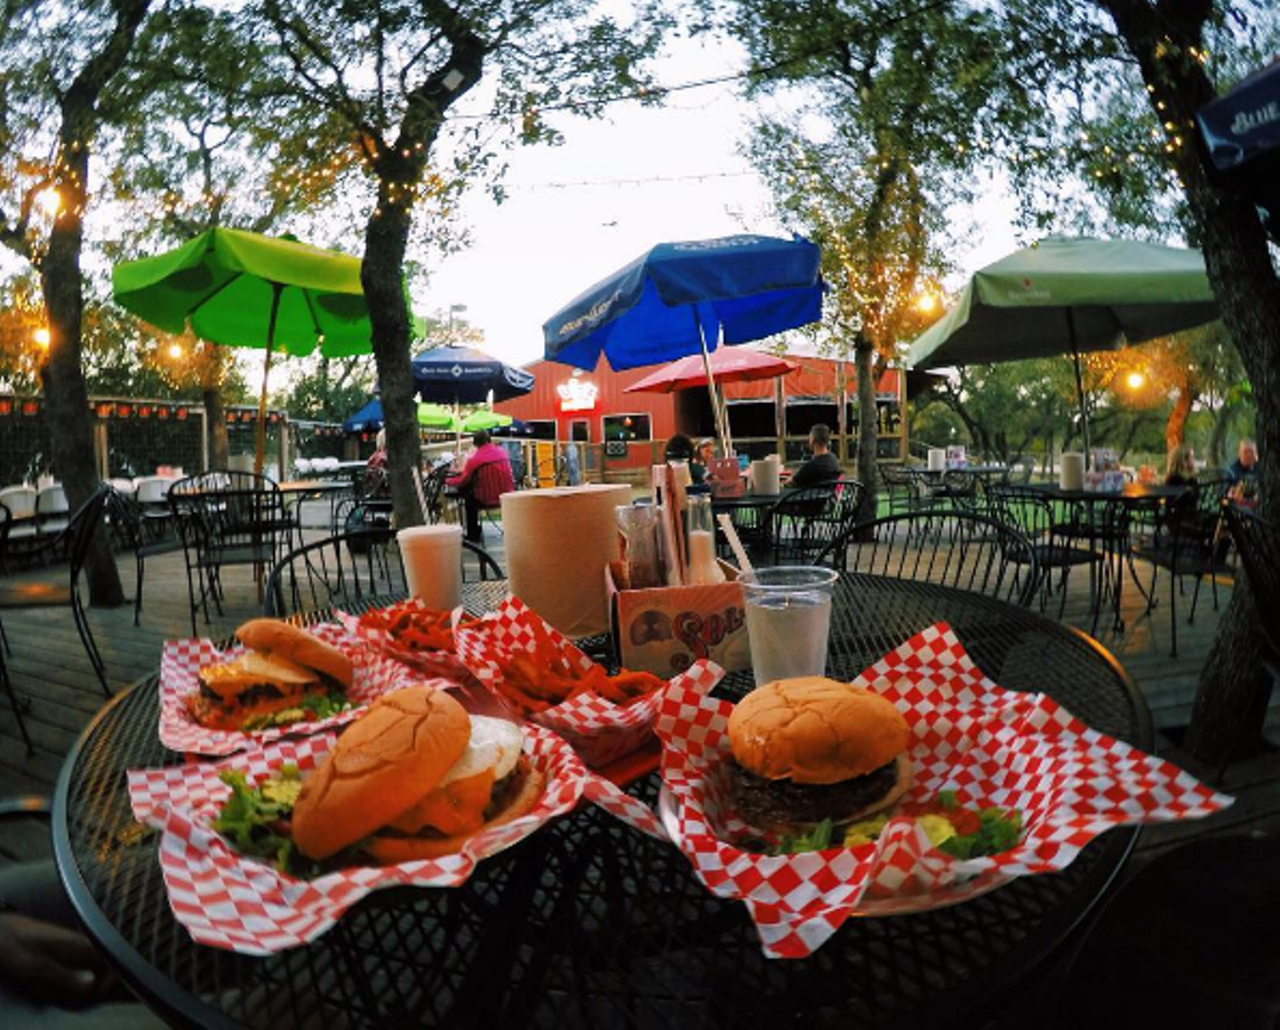 Big'z Burger Joint
Multiple locations
Big'z, known also as the party barn, has a large area for kids to run wild while the older folks can choose from a list of more than 40 beers. 
Photo via Instagram/sea_of_starss